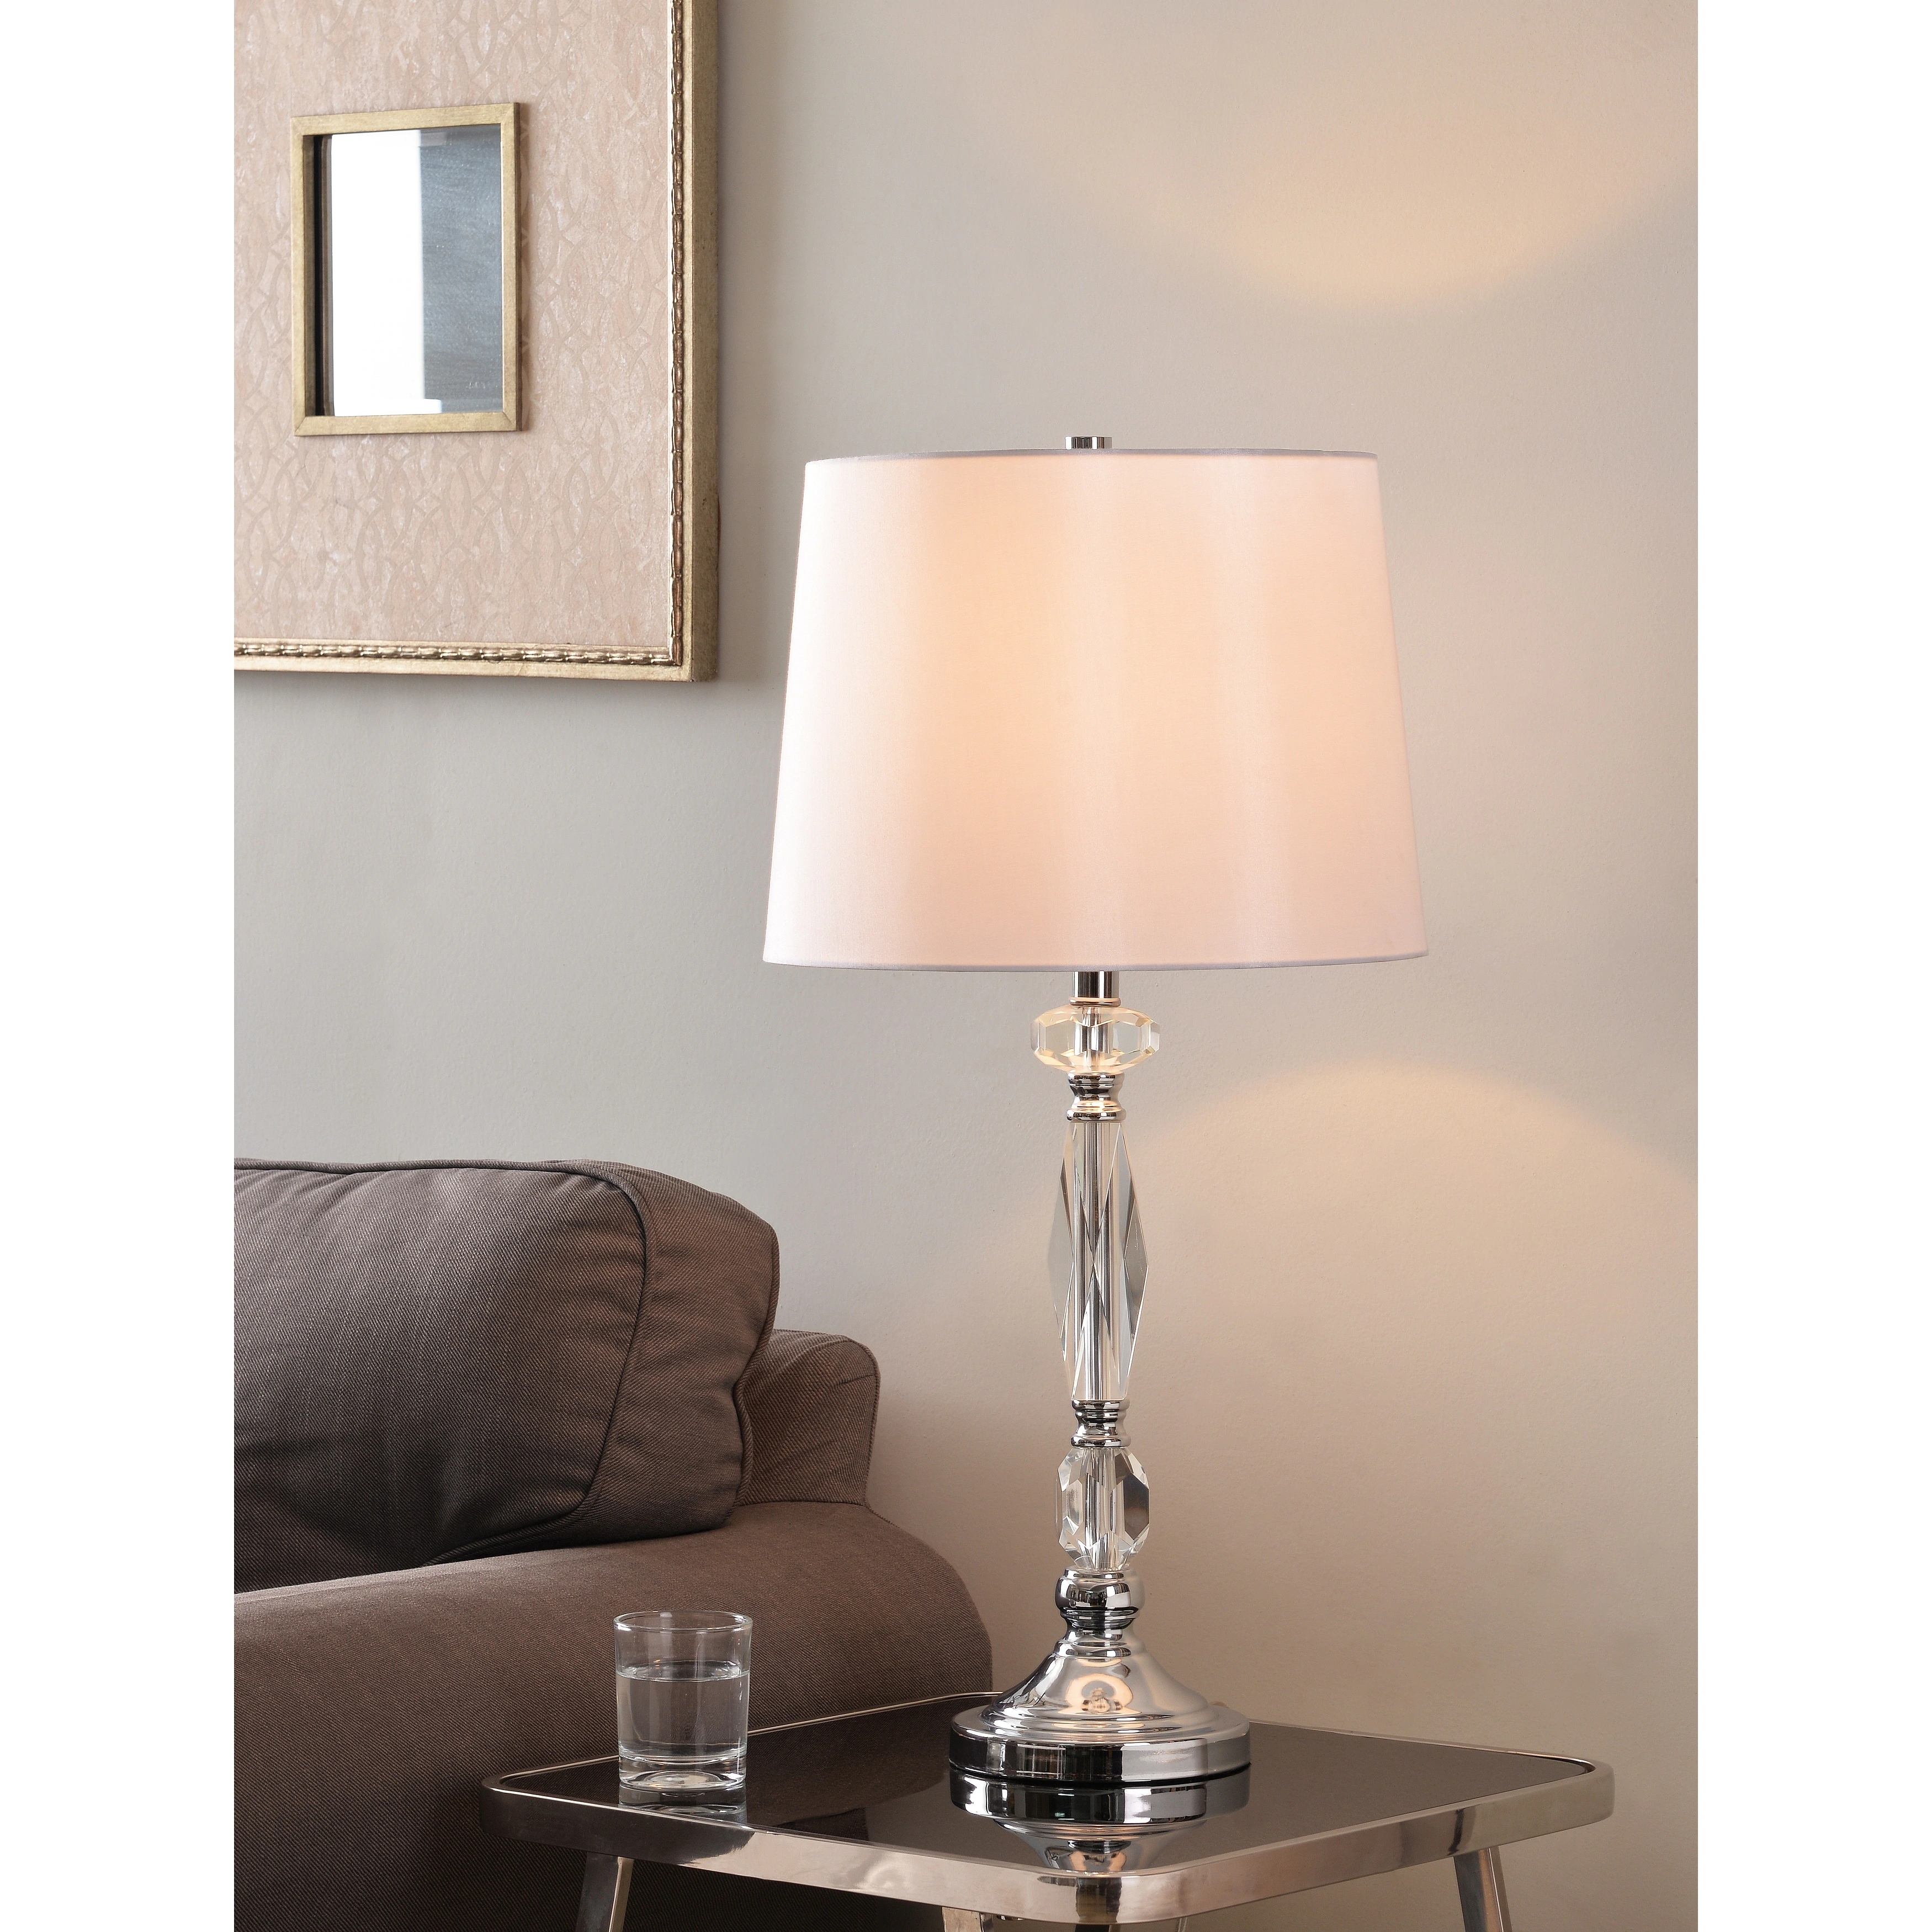 caspian table lamp chrome with crystal accents design craft finish accent free shipping today french furniture square tablecloth sizes round patio cocktail linens support mirror